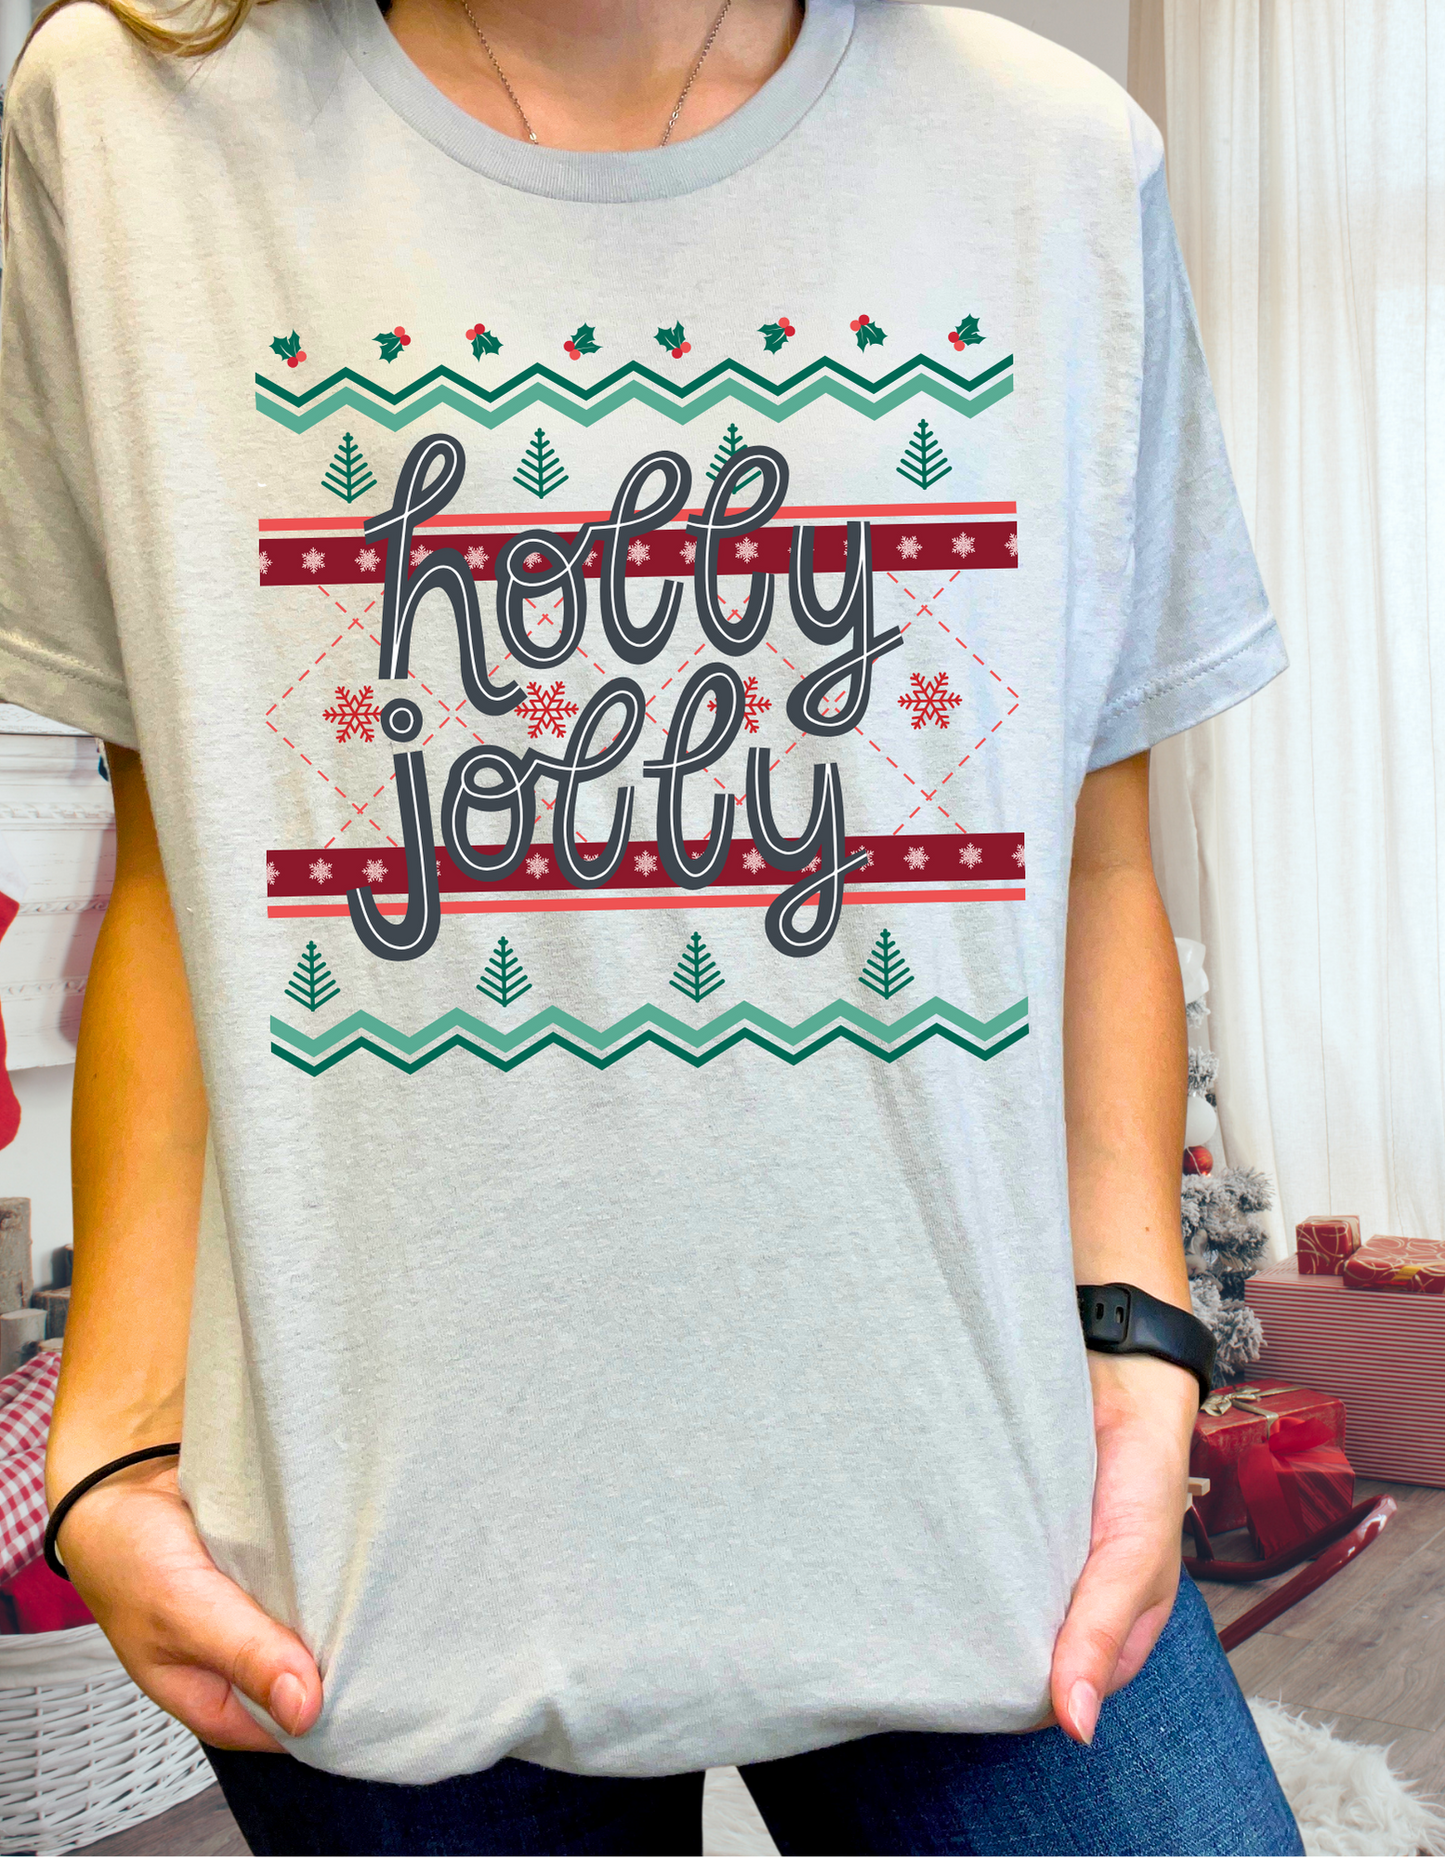 Holly Jolly Sweater design, silver Tee